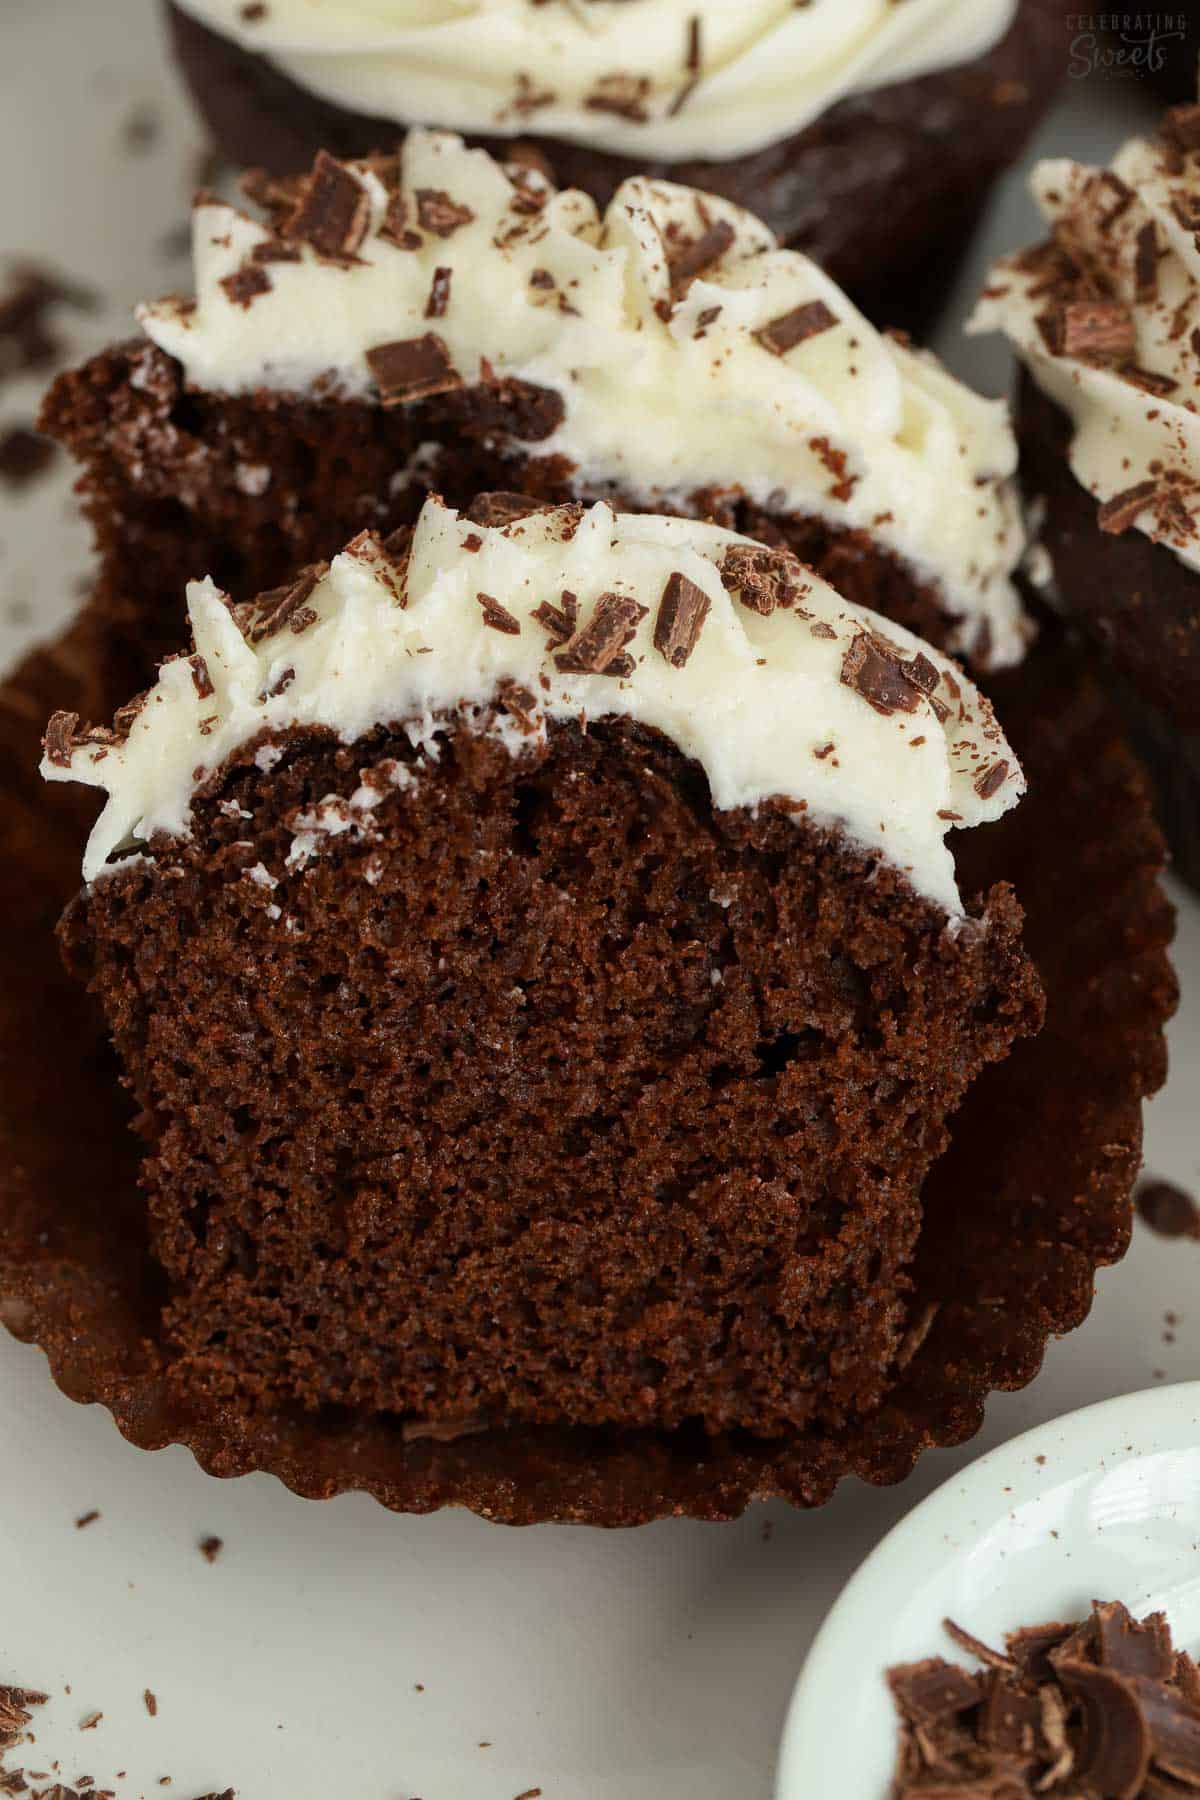 Chocolate cupcake cut in half on a white plate.